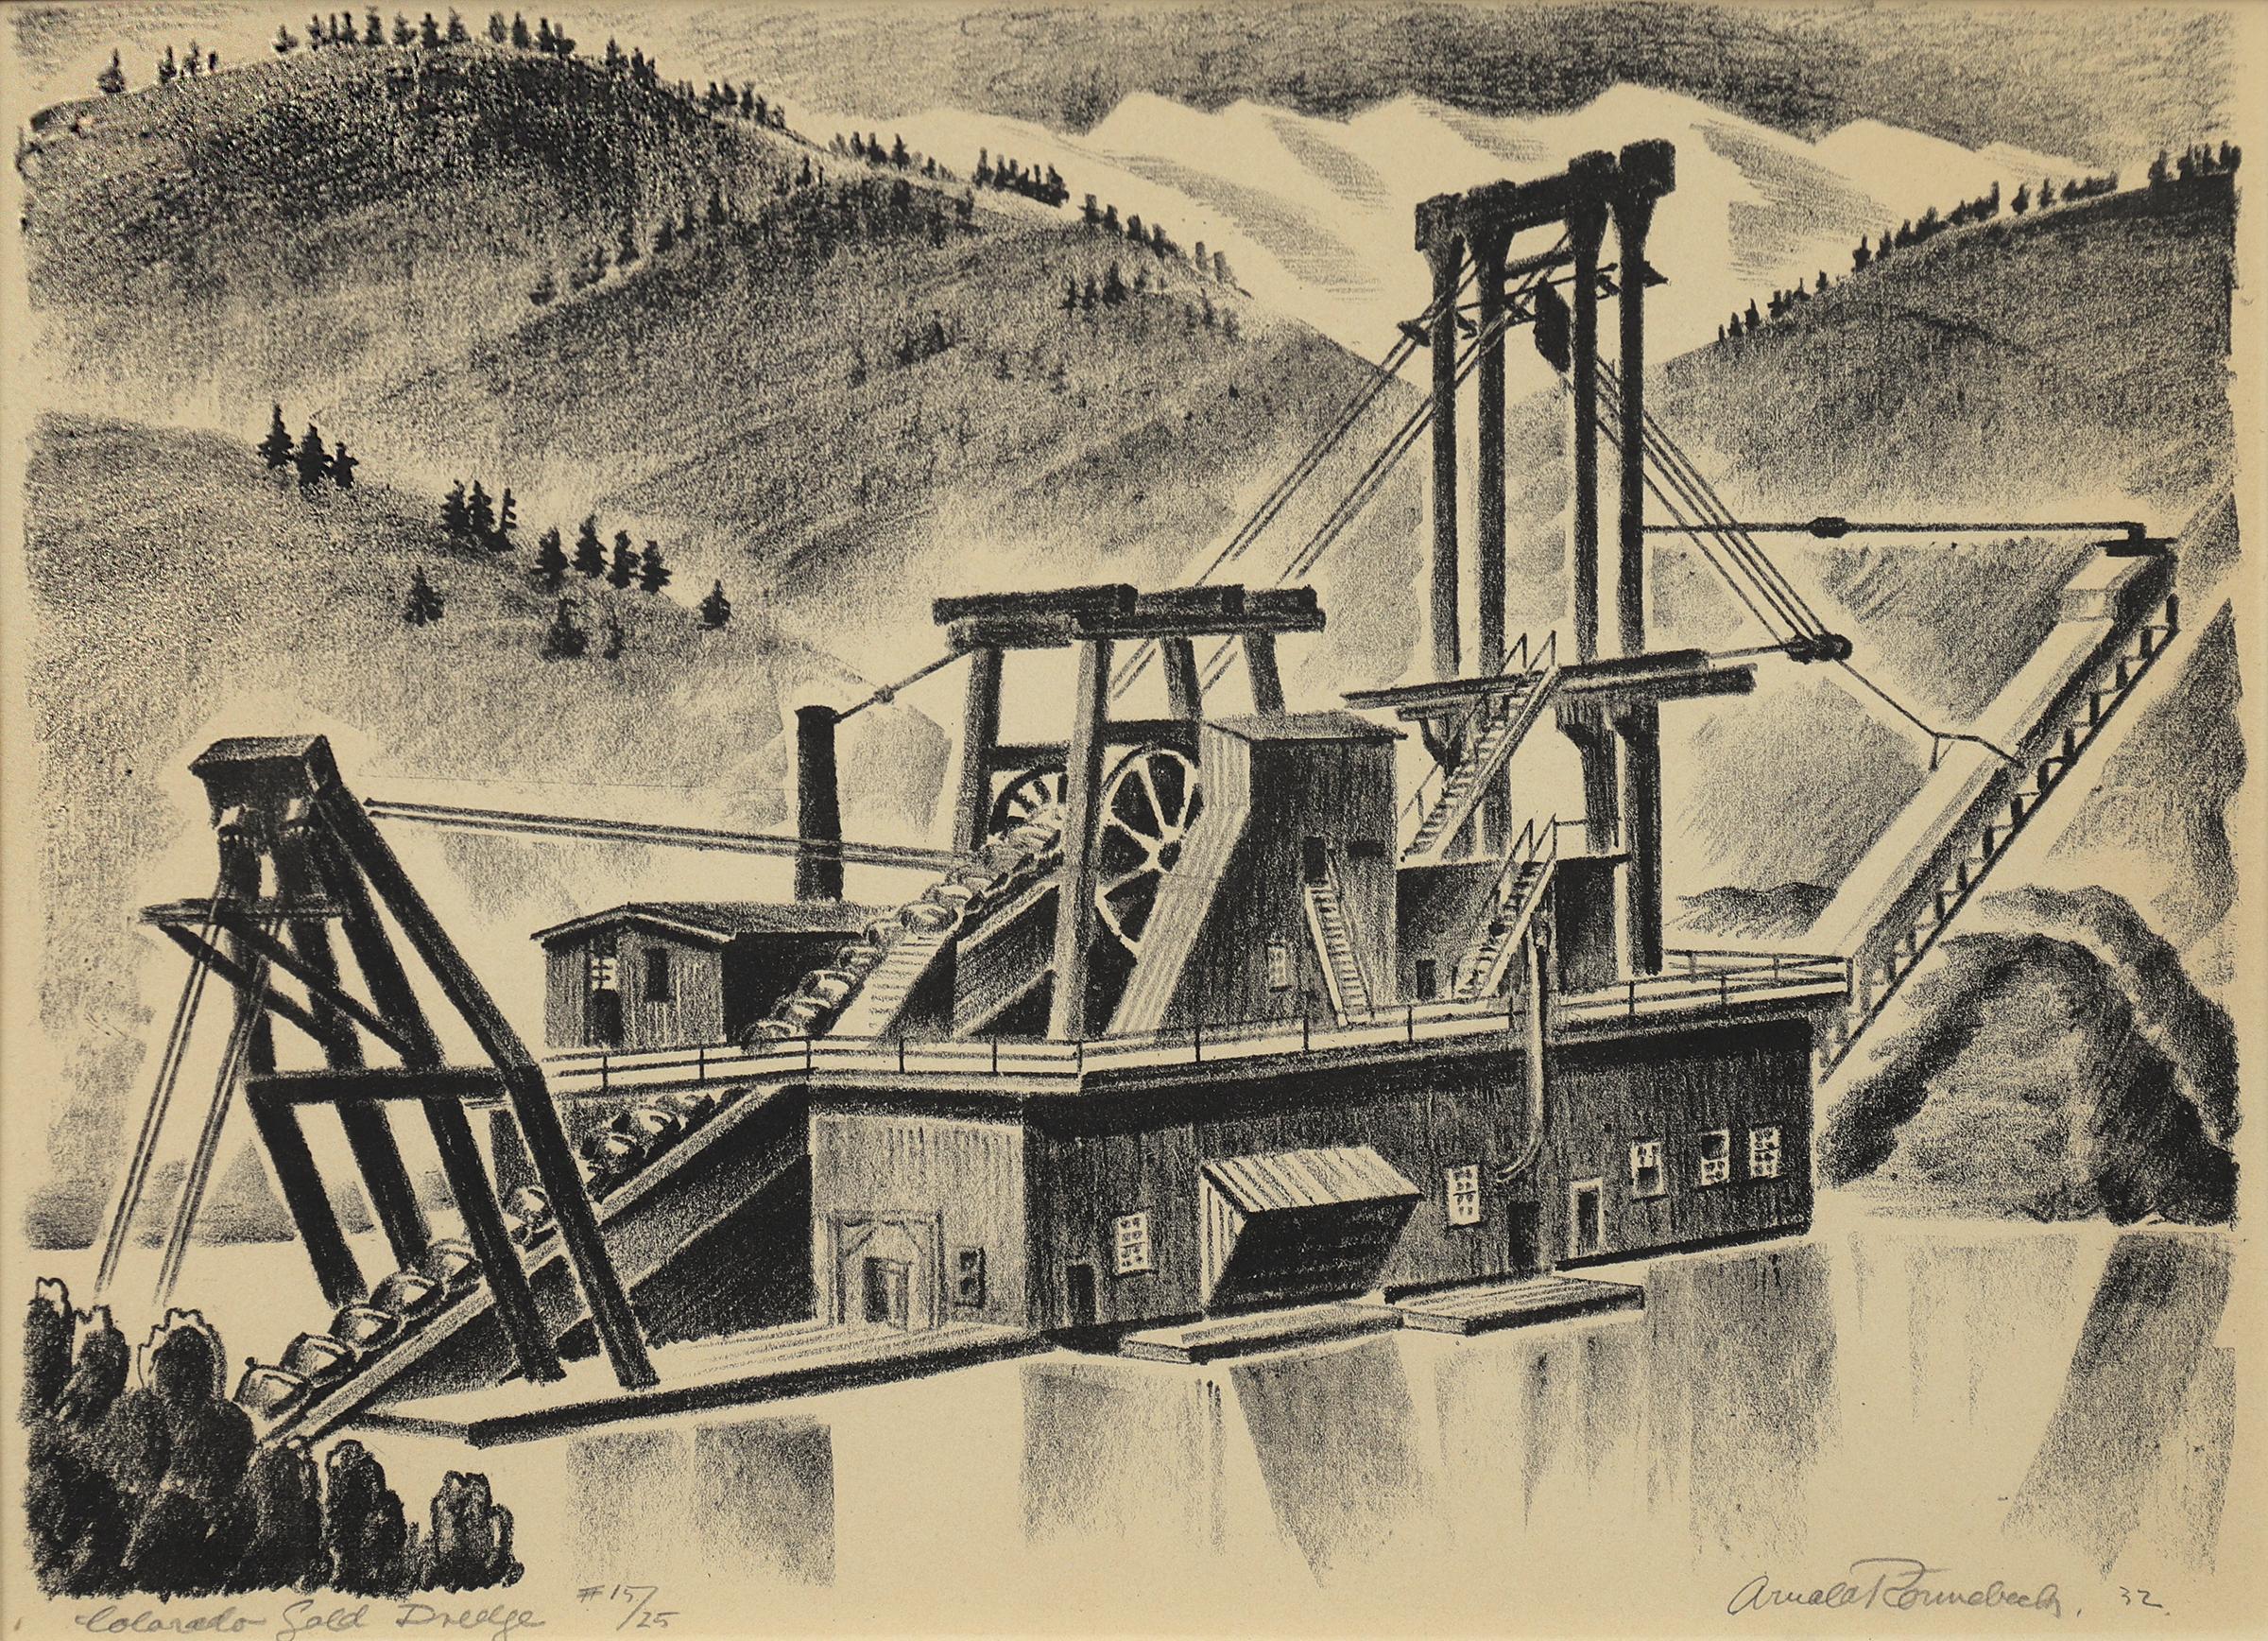 Colorado Gold Dredge, Breckenridge, Signed Black and White Mining Lithograph - Print by Arnold Ronnebeck